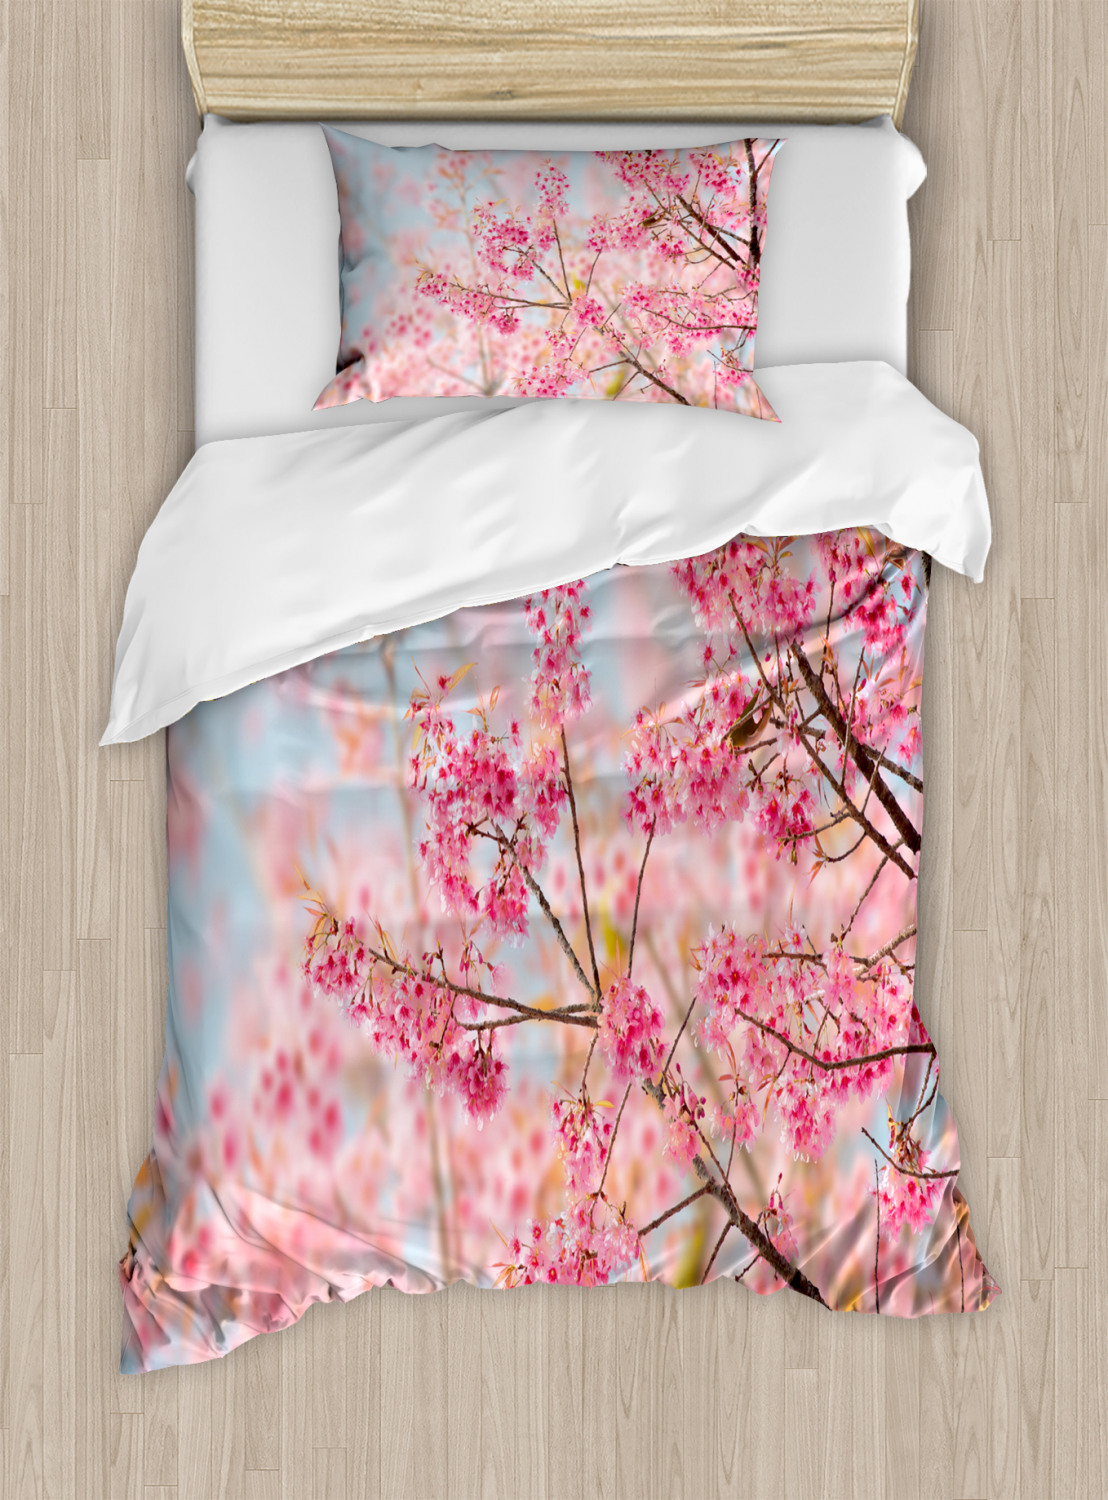 Vibrant Sakura Flowers Print Details about  / Japanese Quilted Bedspread /& Pillow Shams Set